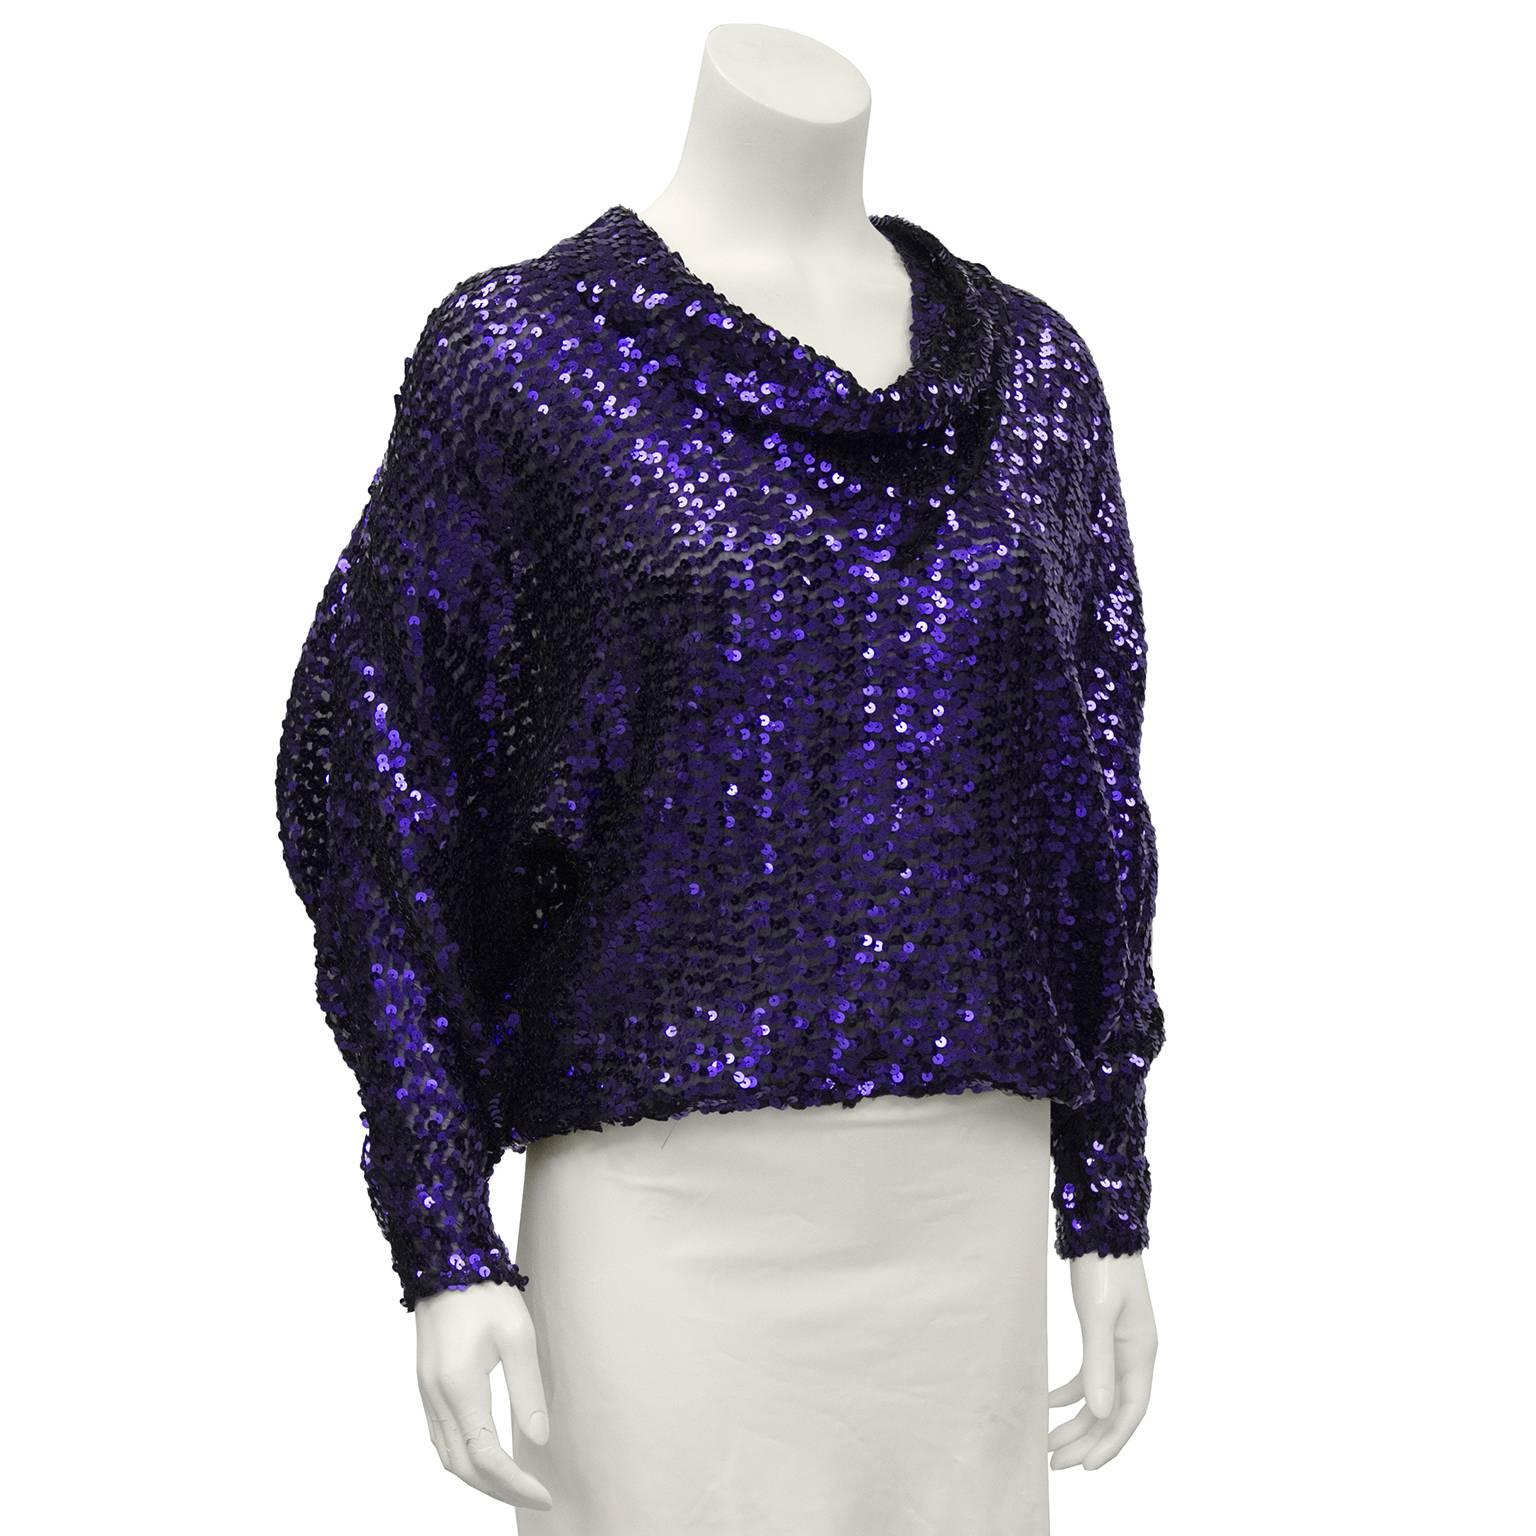 Versatile 1960's purple metallic sequin top with gathered stretchy hem and batwing style sleeves. Perfect to wear over jeans or to dress up a black pant for a special evening. Can be worn front or back, very little difference. In excellent